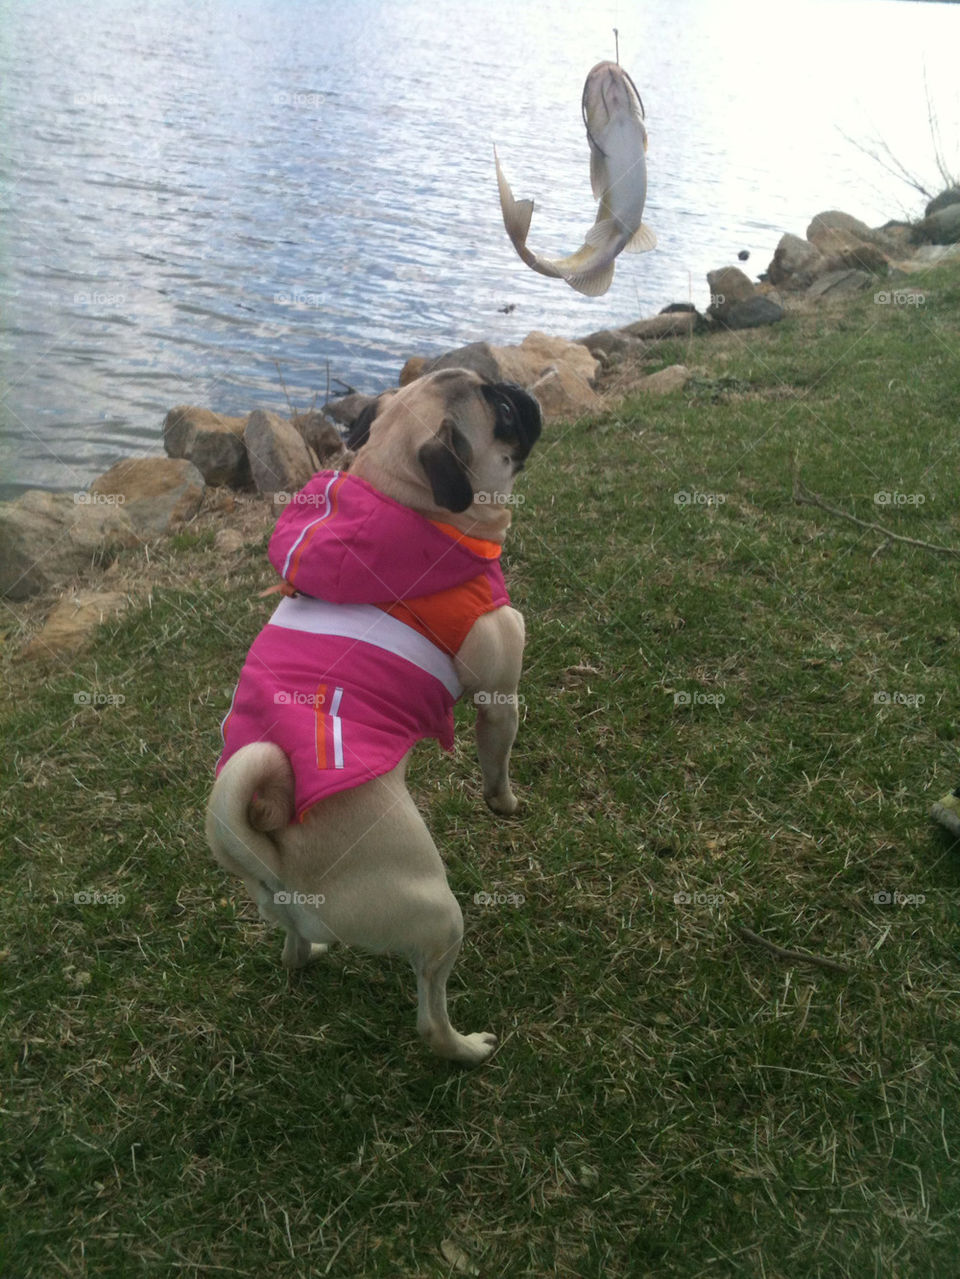 Pug helps catch fish. Molly went fishing with her boy and helped him catch this fish. Then, she was curious... She wanted to smell it.